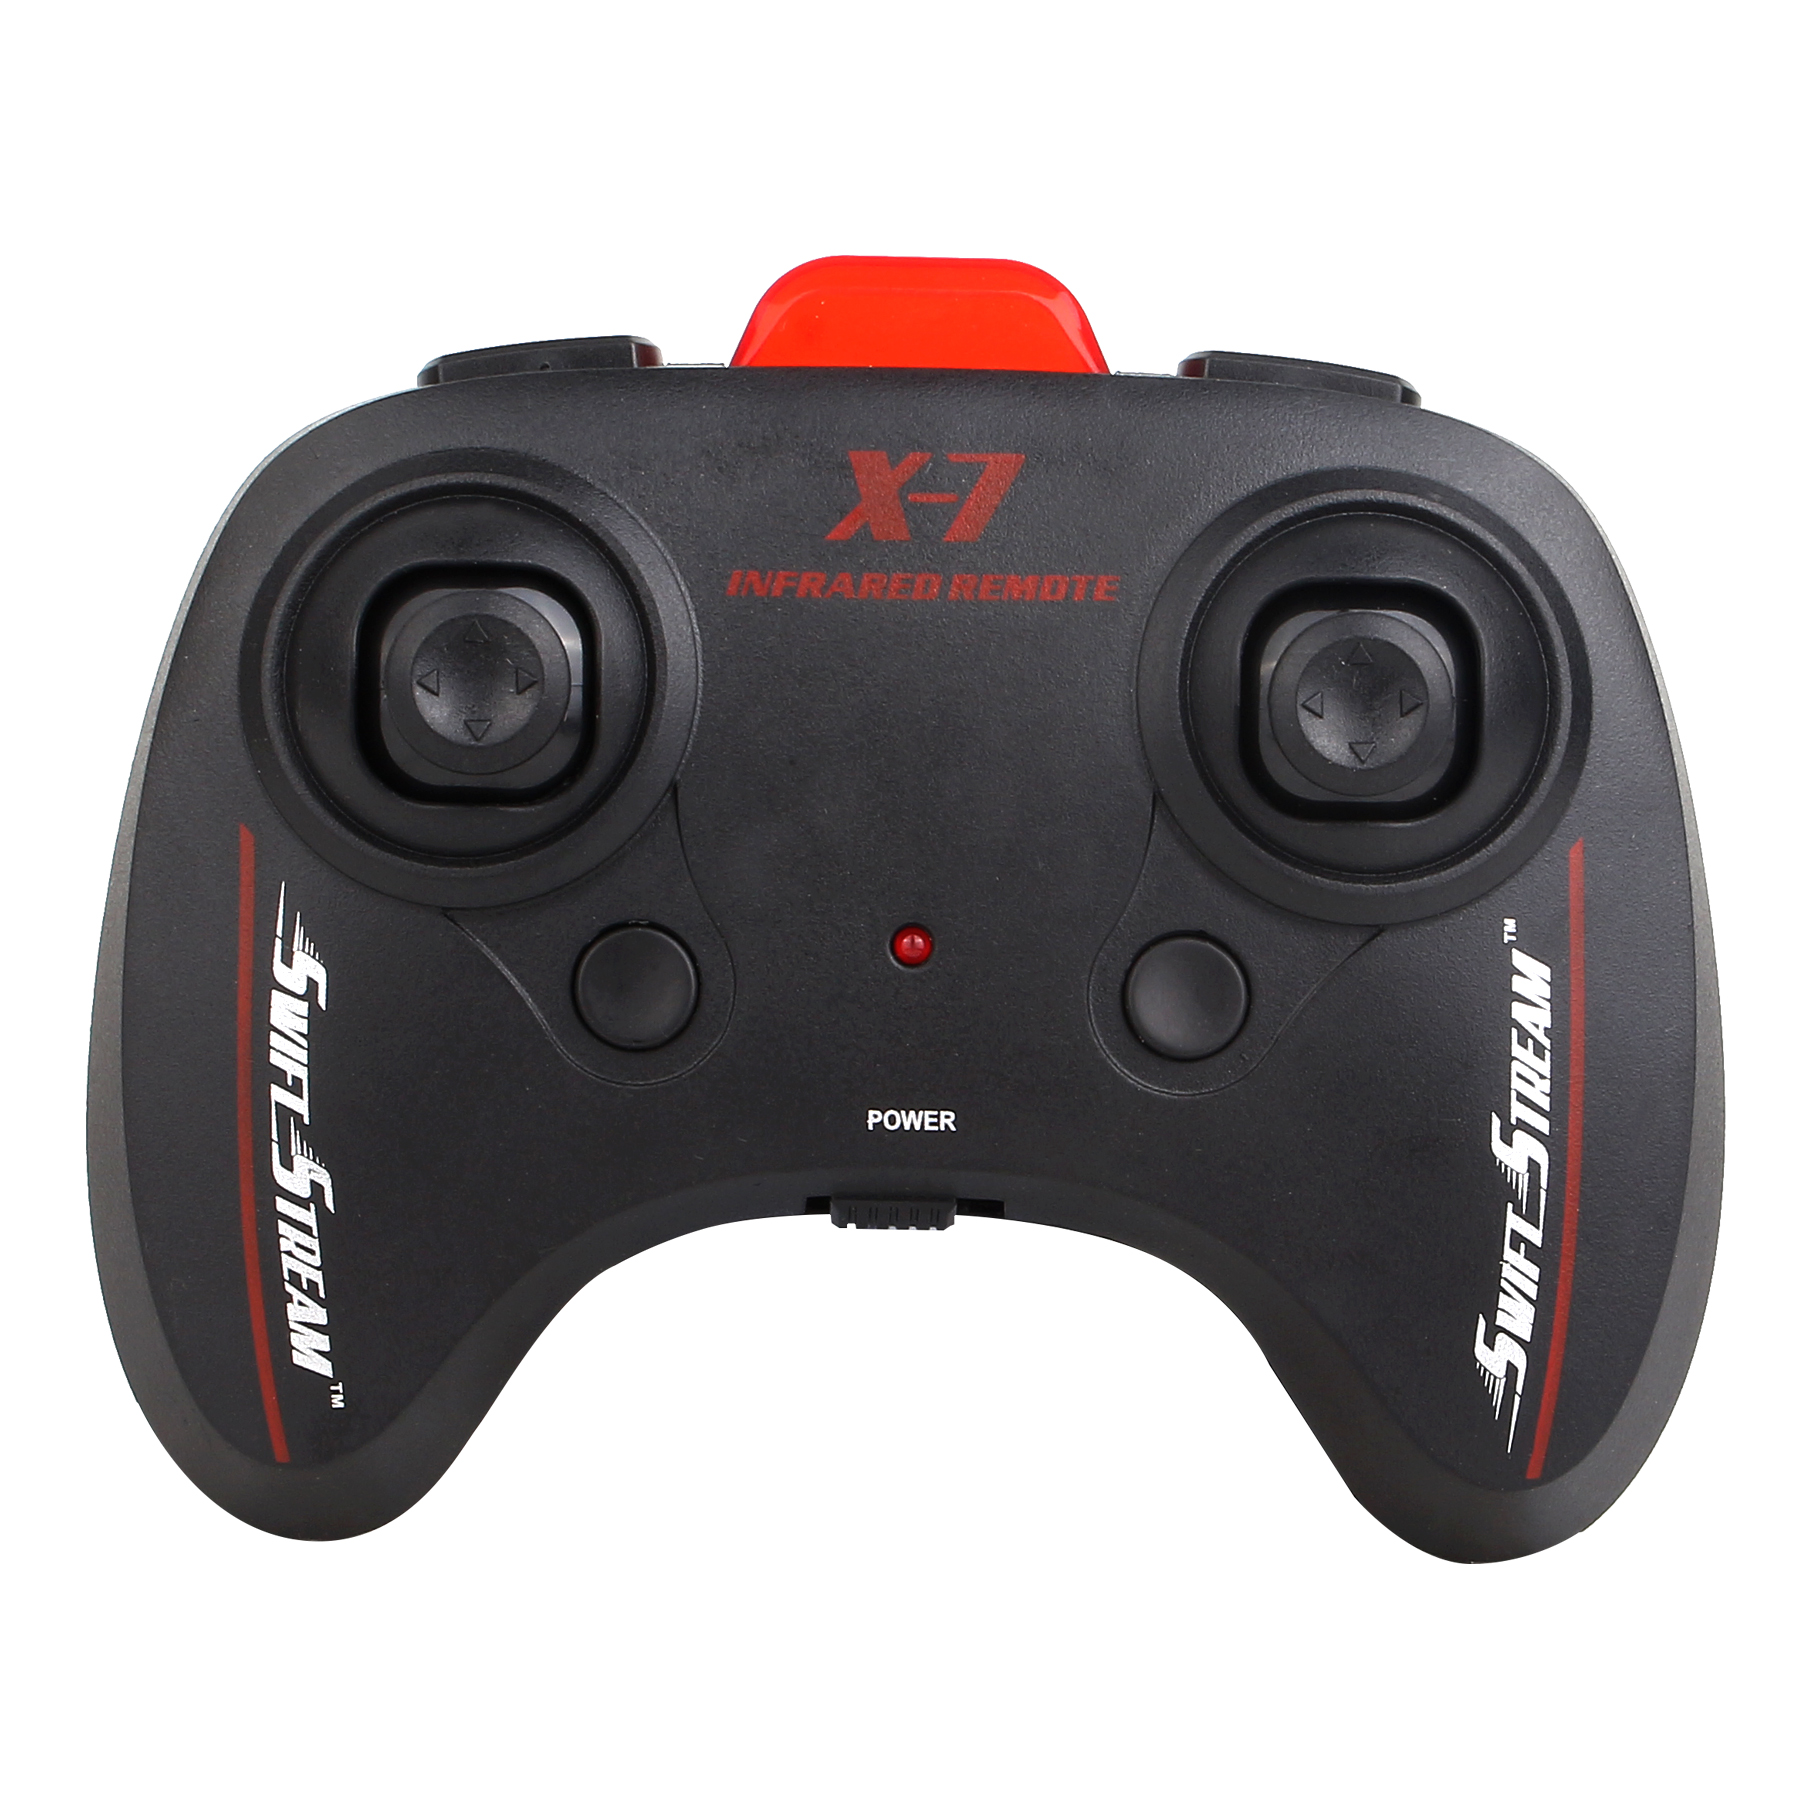 Swift Stream RC  Remote Control Helicopter, Red - image 5 of 5